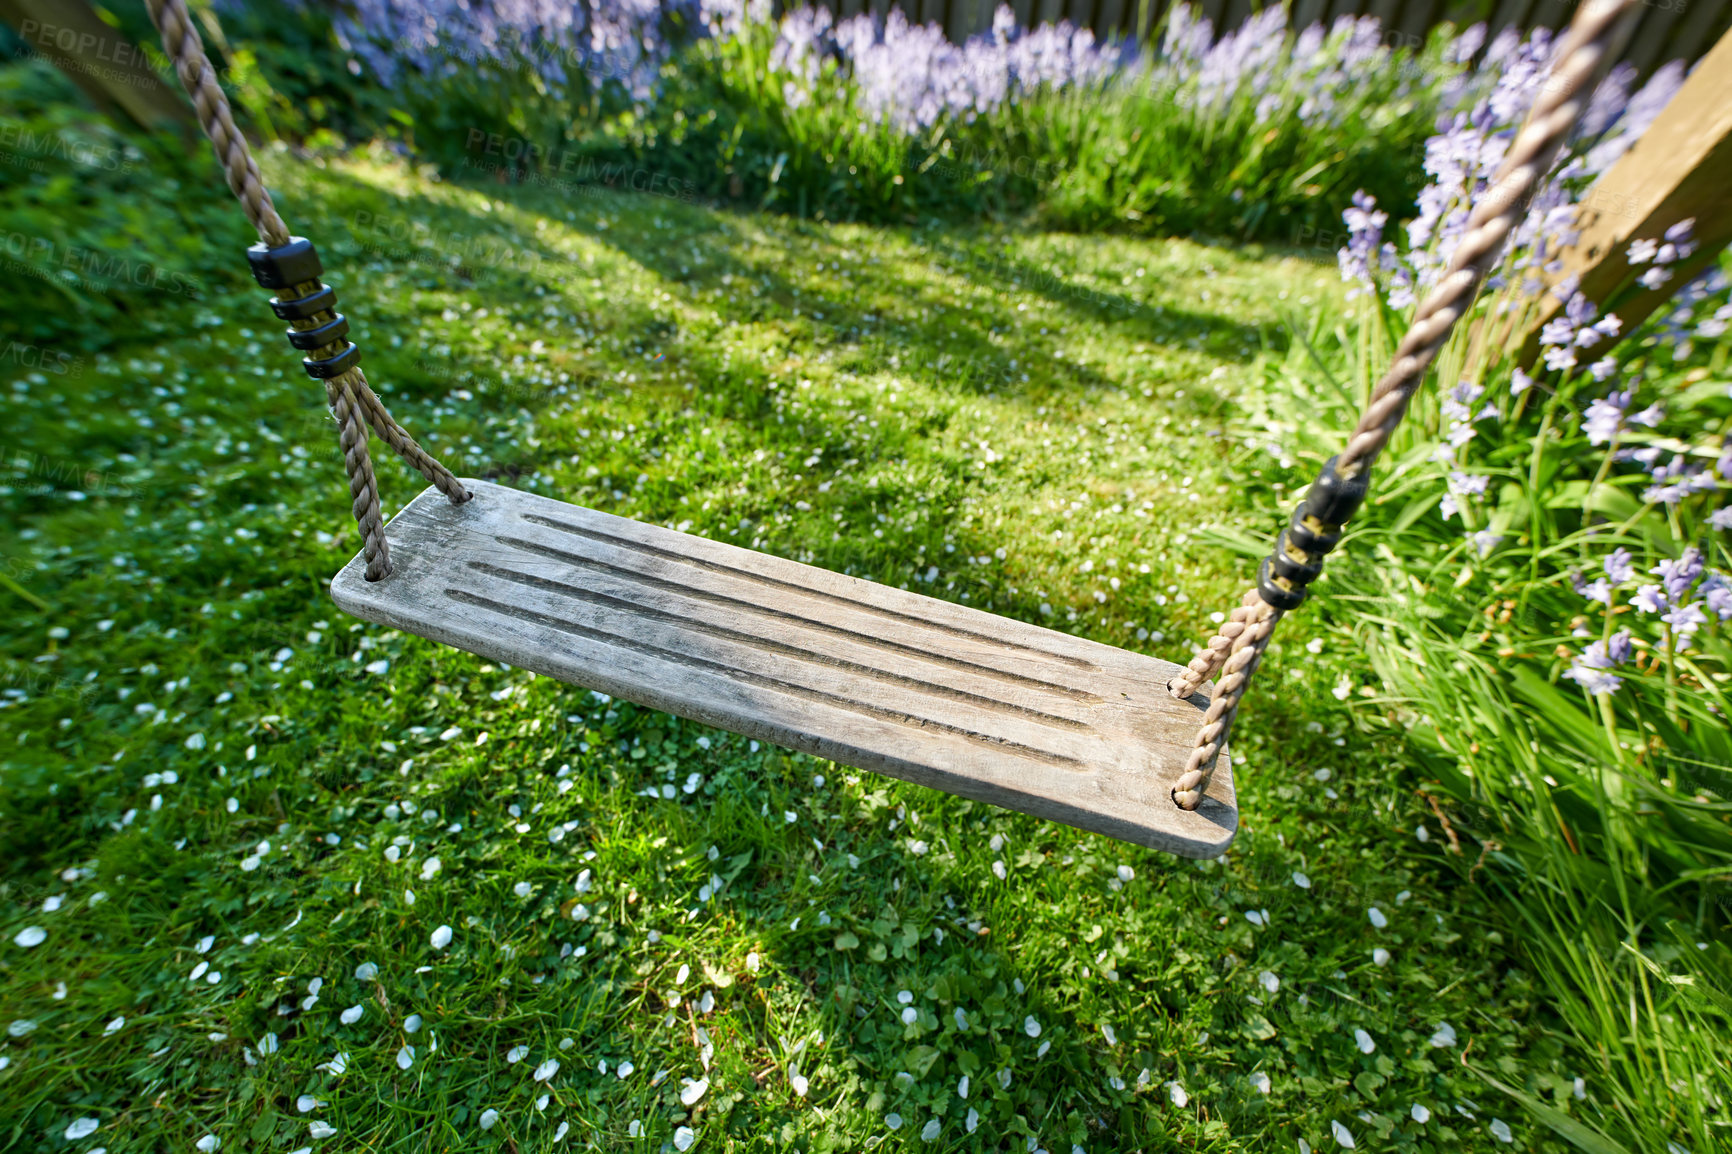 Buy stock photo Closeup of a swing on a rope in a peaceful backyard garden in summer. Green lush grass foliage growing in a garden with lavender flowers blossoming and blooming. Old rustic wooden swing in a meadow